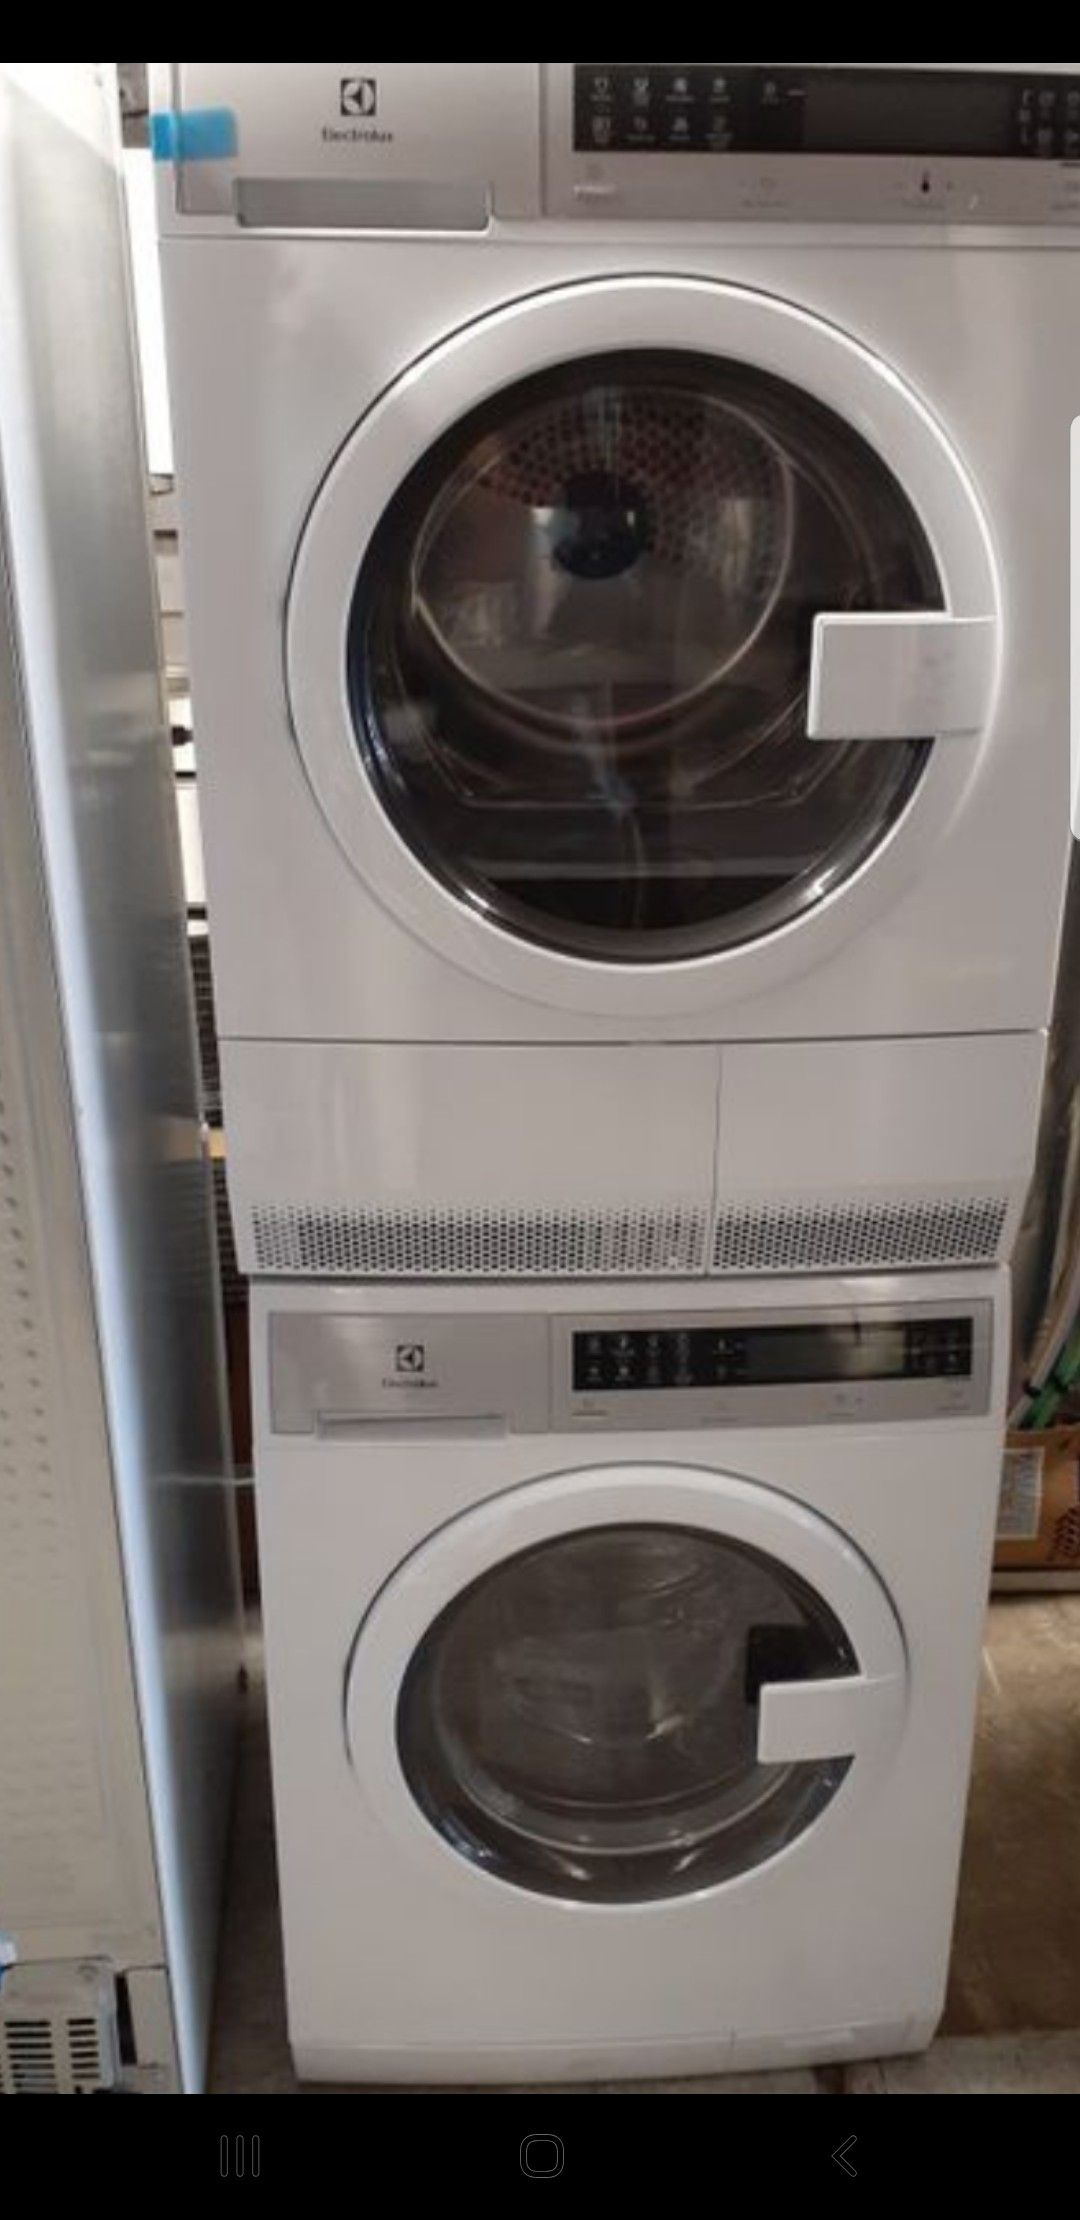 Huge Sale store full of nice reconditioned refrigerator washer dryer stove stackable+financing available available free warranty🐾🌼🍀\%+